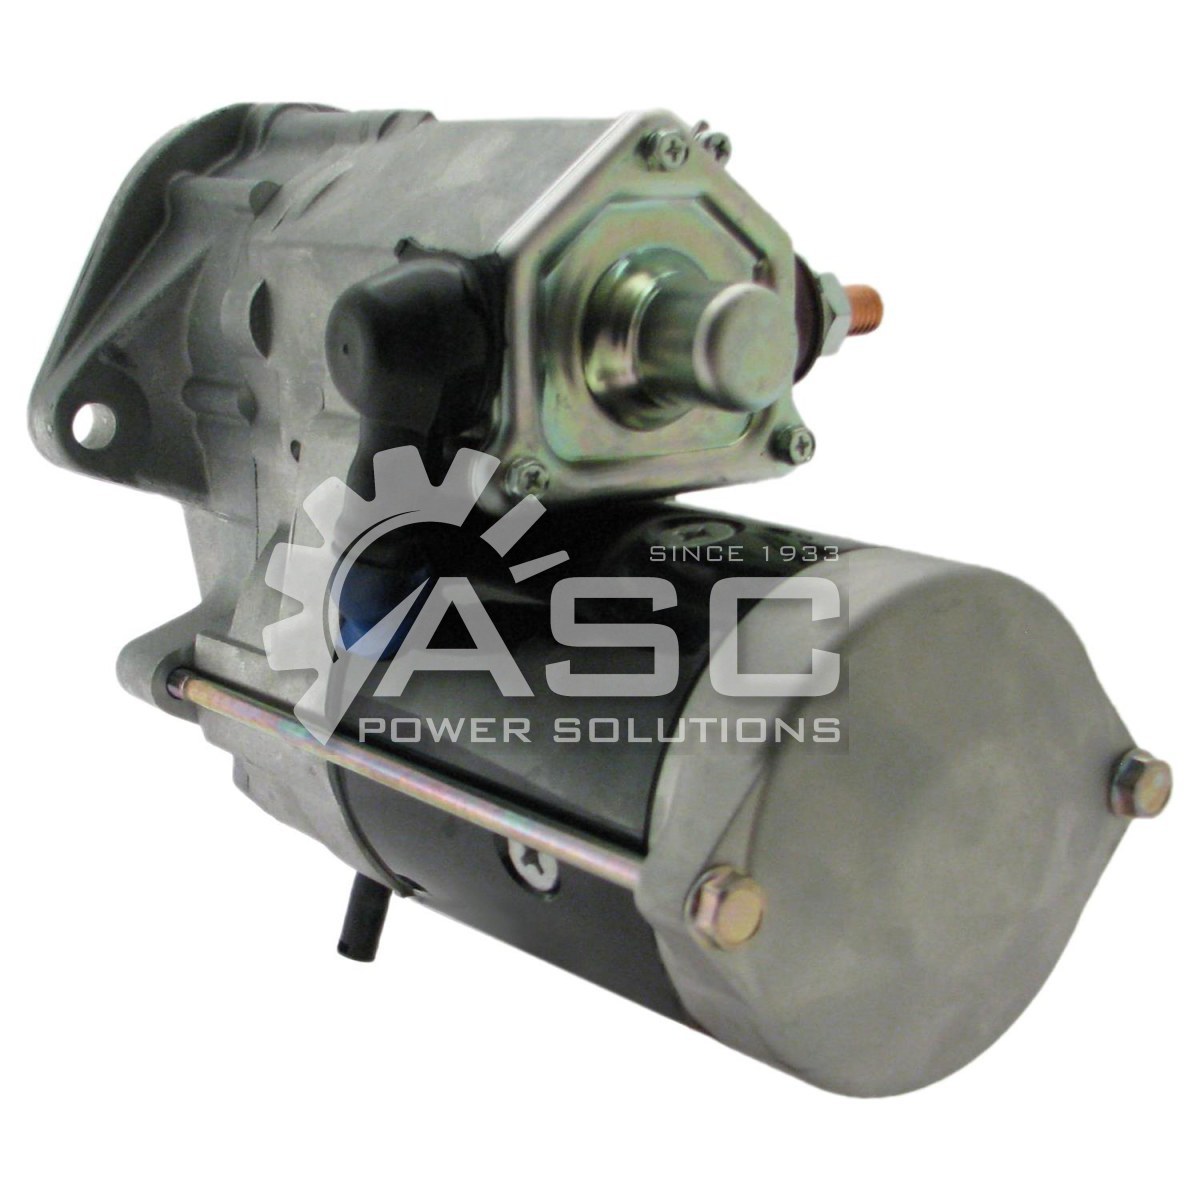 S521574_REMAN ASC POWER SOLUTIONS DENSO R STARTER MOTOR FOR CATERPILLAR AND BLUE BIRD 12V 10 TOOTH CLOCKWISE ROTATION OFF SET GEAR REDUCTION (OSGR)